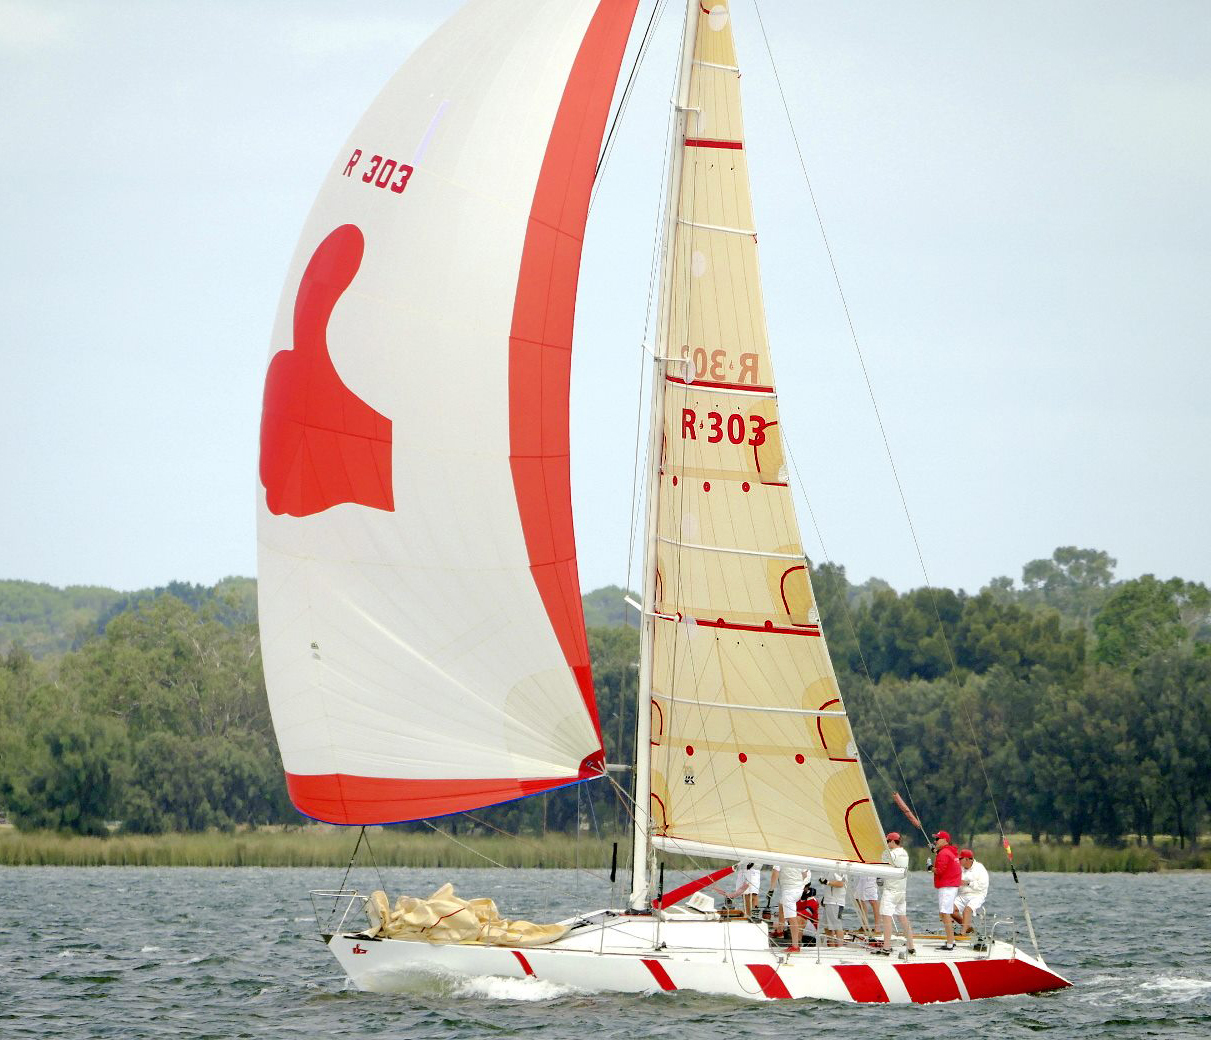 The Frers 40-footer HITCHHIKER, which won the Two-Ton Worlds in 1981. Here she is flying an aramid tri-radial mainsail. Lindsay Preece/Ironbark Photos